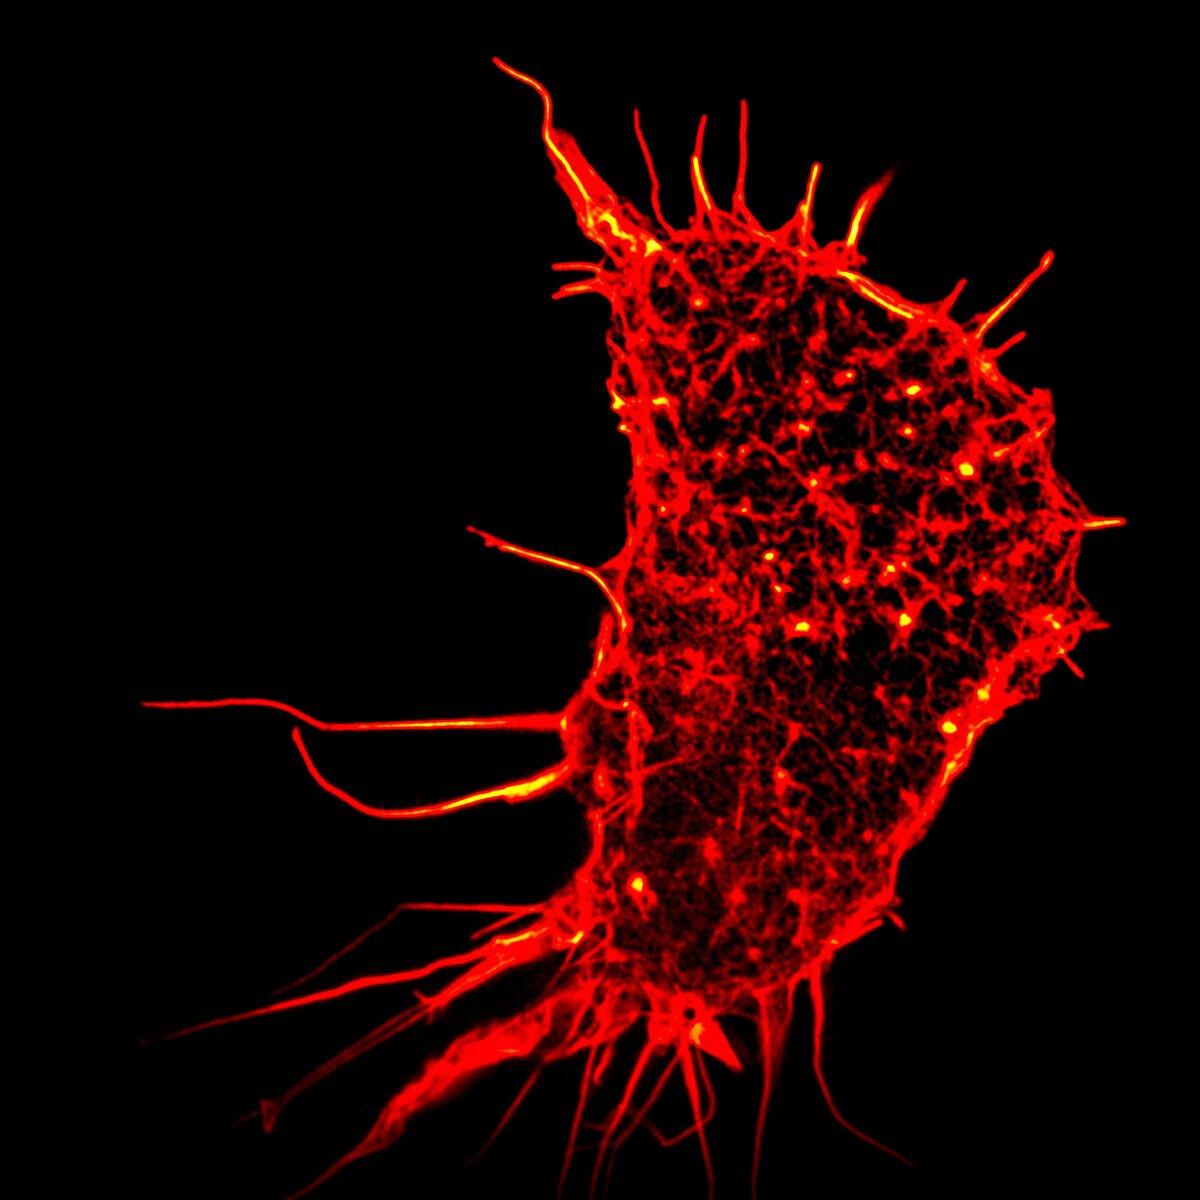 A single human kidney cell using super-resolution microscopy